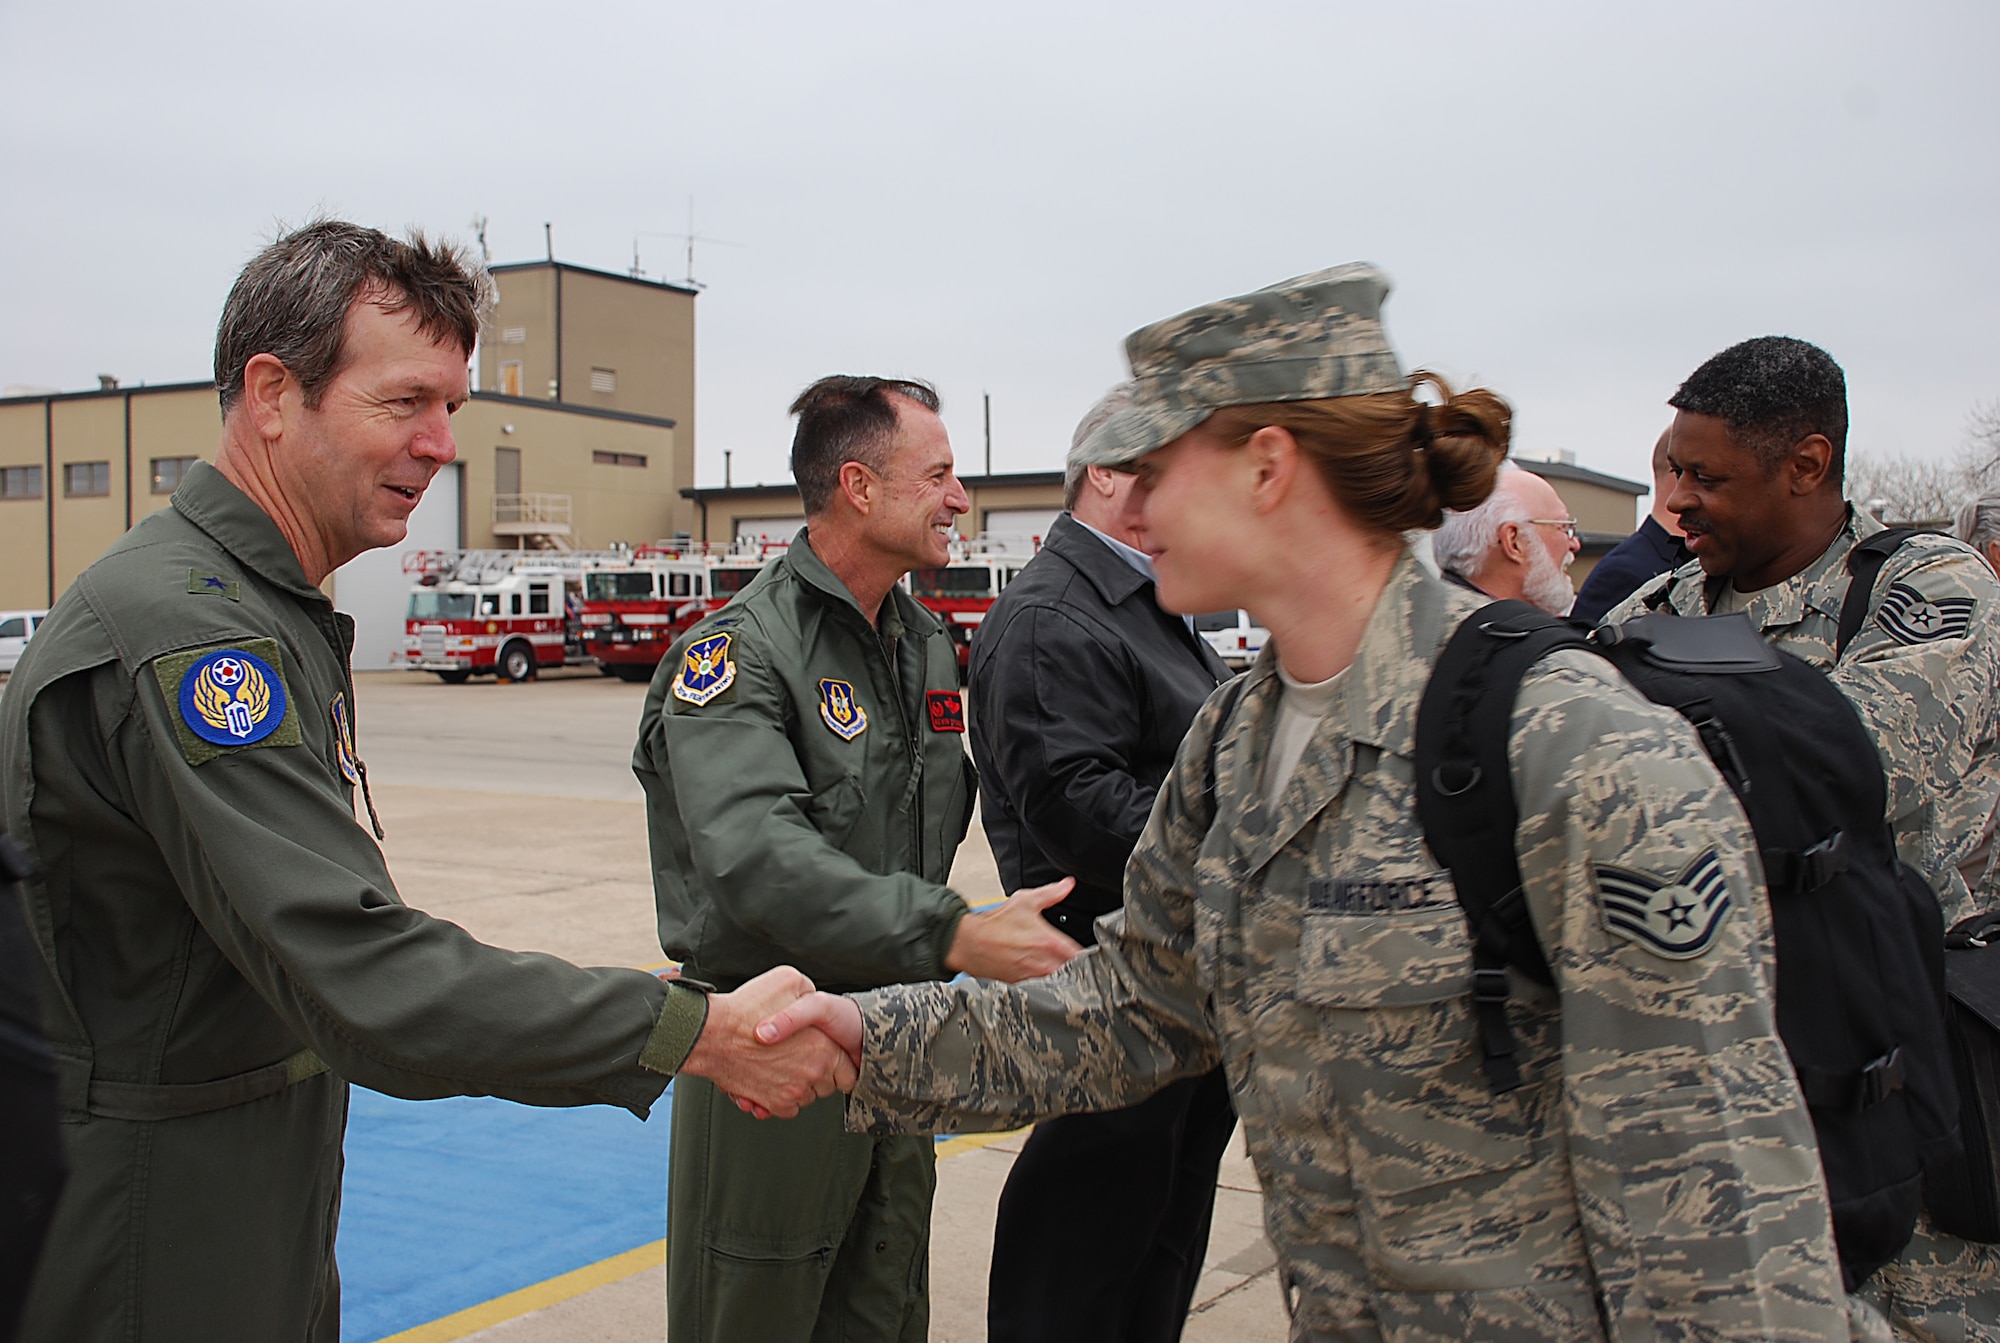 Maj. Gen. TC Coon, 10th Air Force commander (left), and Col. Kevin C. Pottinger, 301st Fighter Wing commander (center), bid farewell and safe journey to more than 100 301FW members as they board aircraft bound for Southwest Asia. The troops have deployed in support of Operation Iraqi Freedom and will return in the spring. General Coon pinned on his second star Feb. 20. (U.S. Air Force Photo/Tech. Sgt. Julie Briden-Garcia)